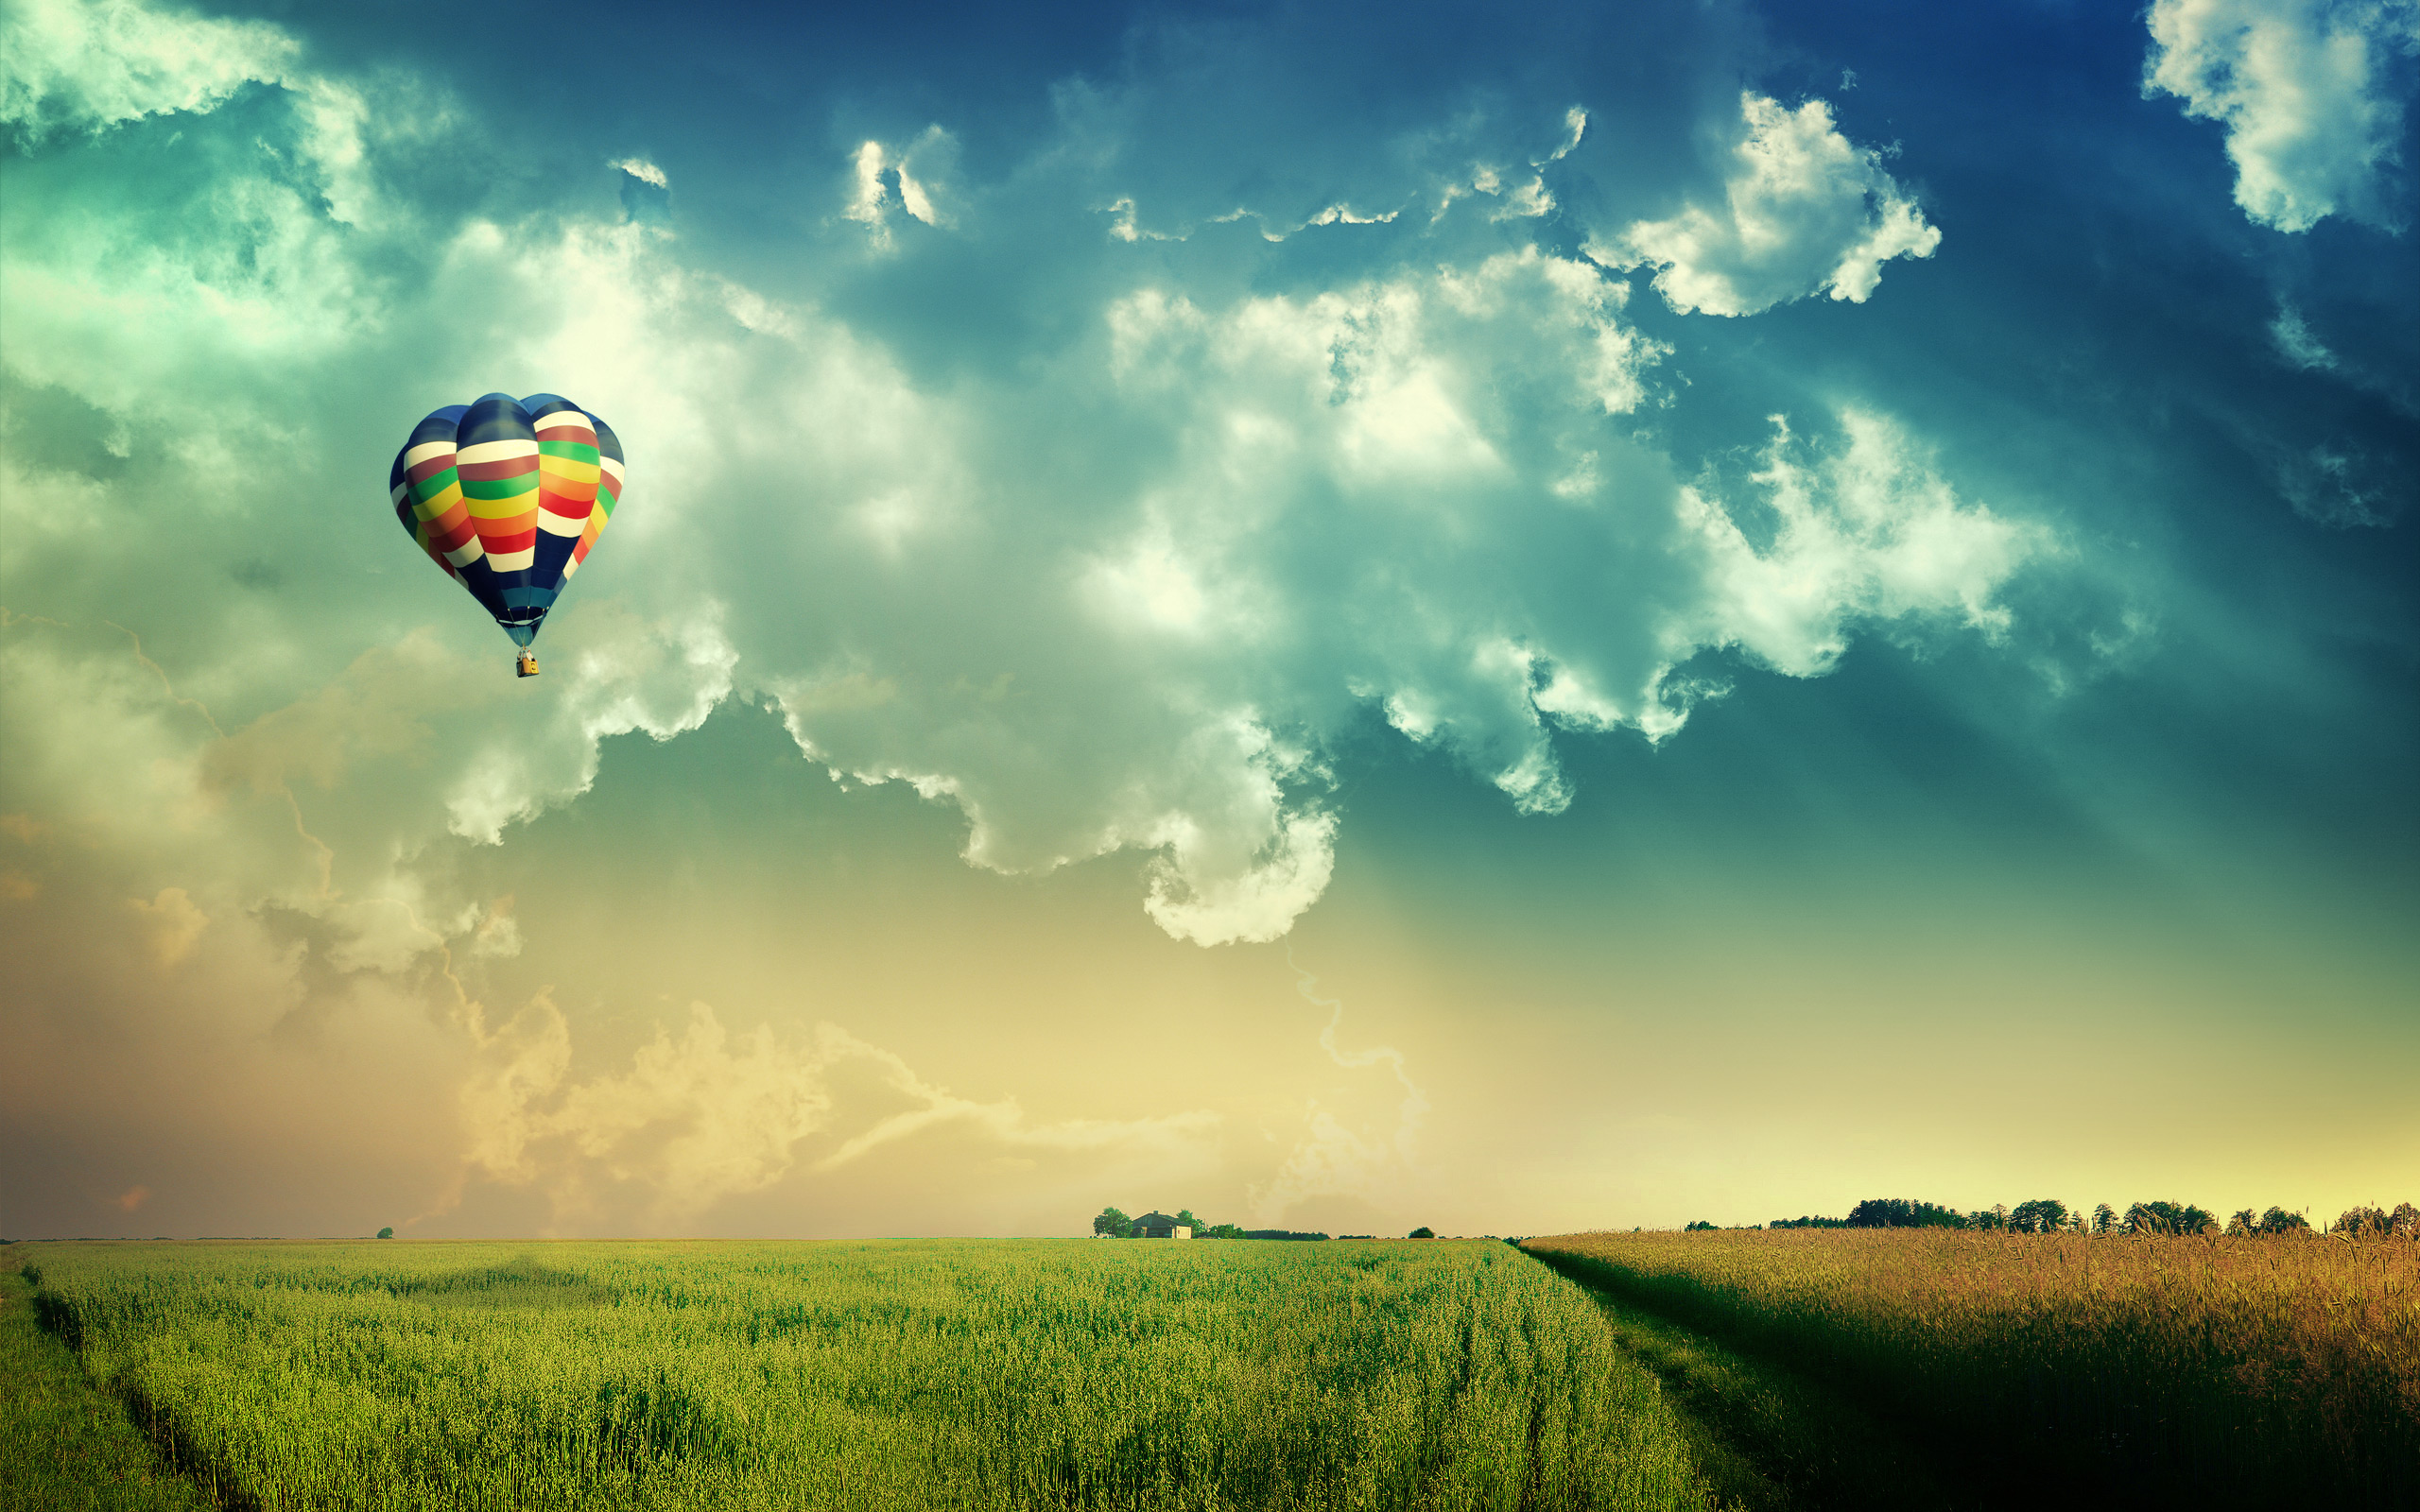 clouds, Landscapes, Nature, Fields, Hot, Air, Balloons, Skyscapes Wallpaper